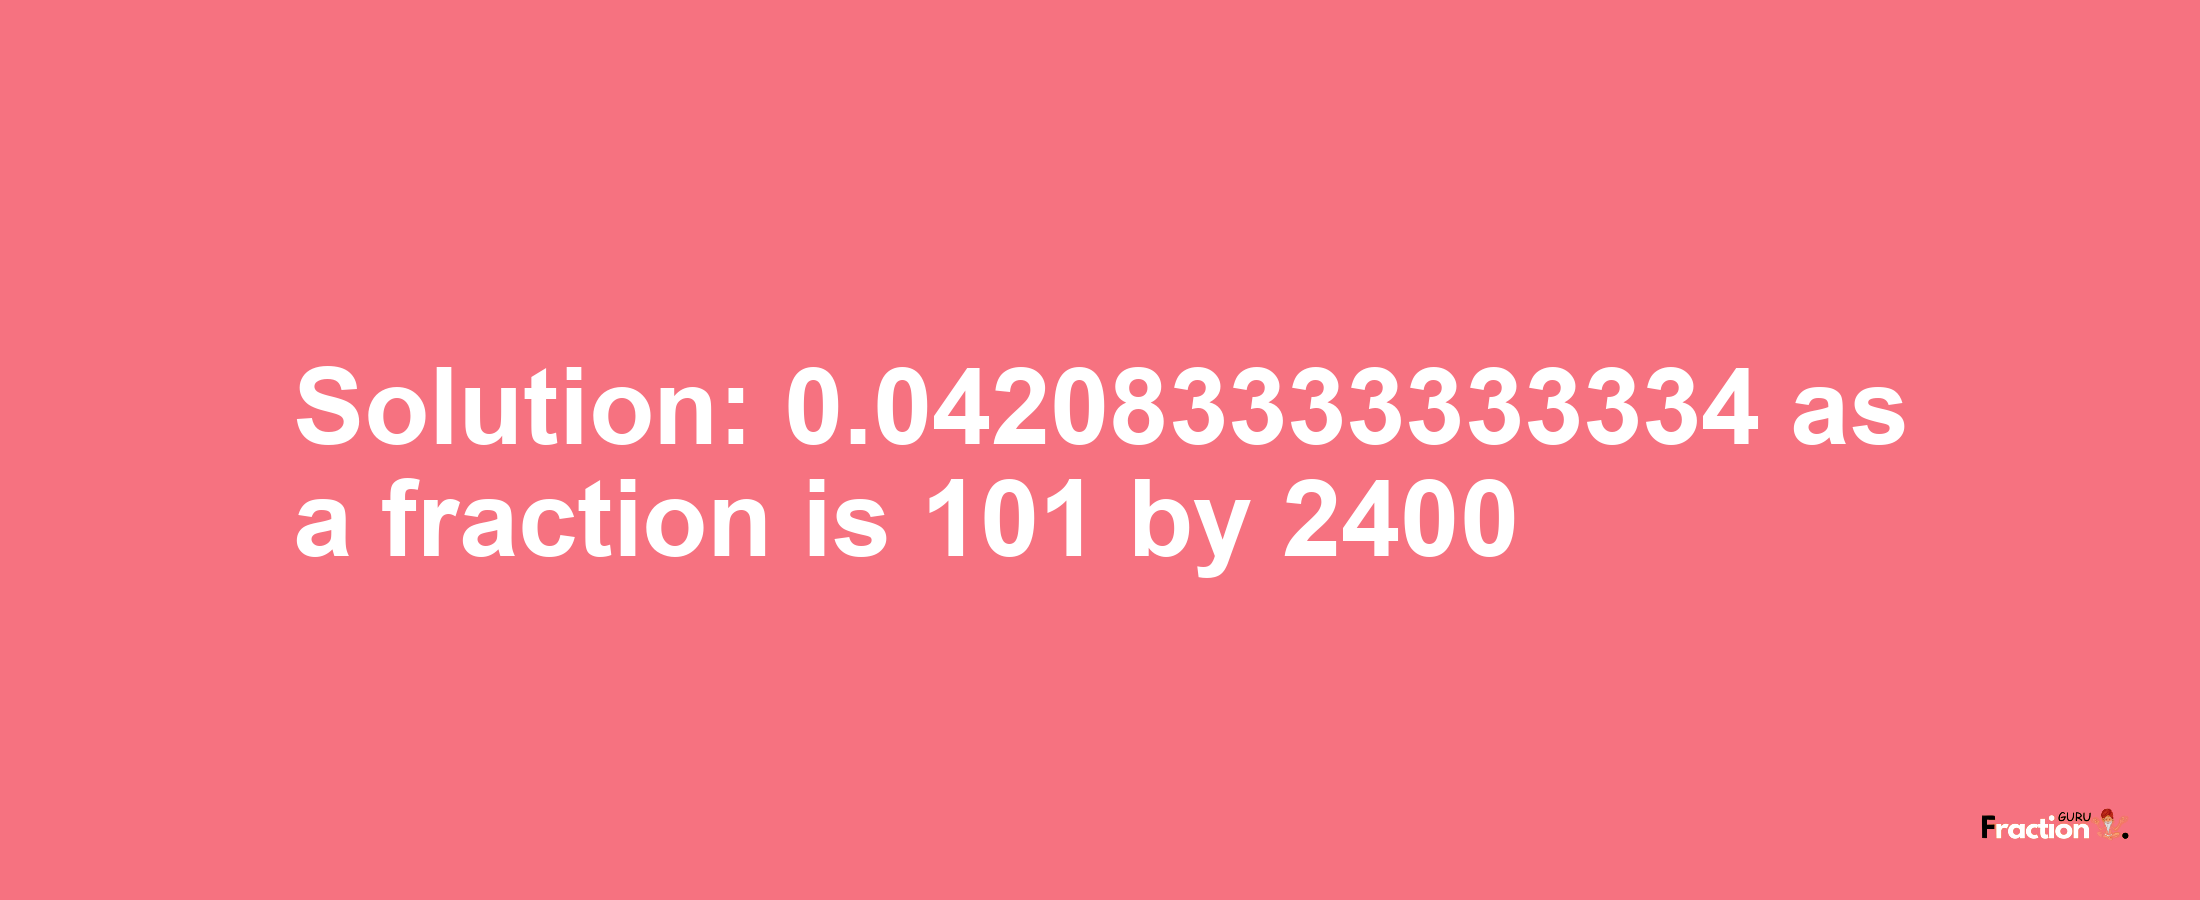 Solution:0.042083333333334 as a fraction is 101/2400